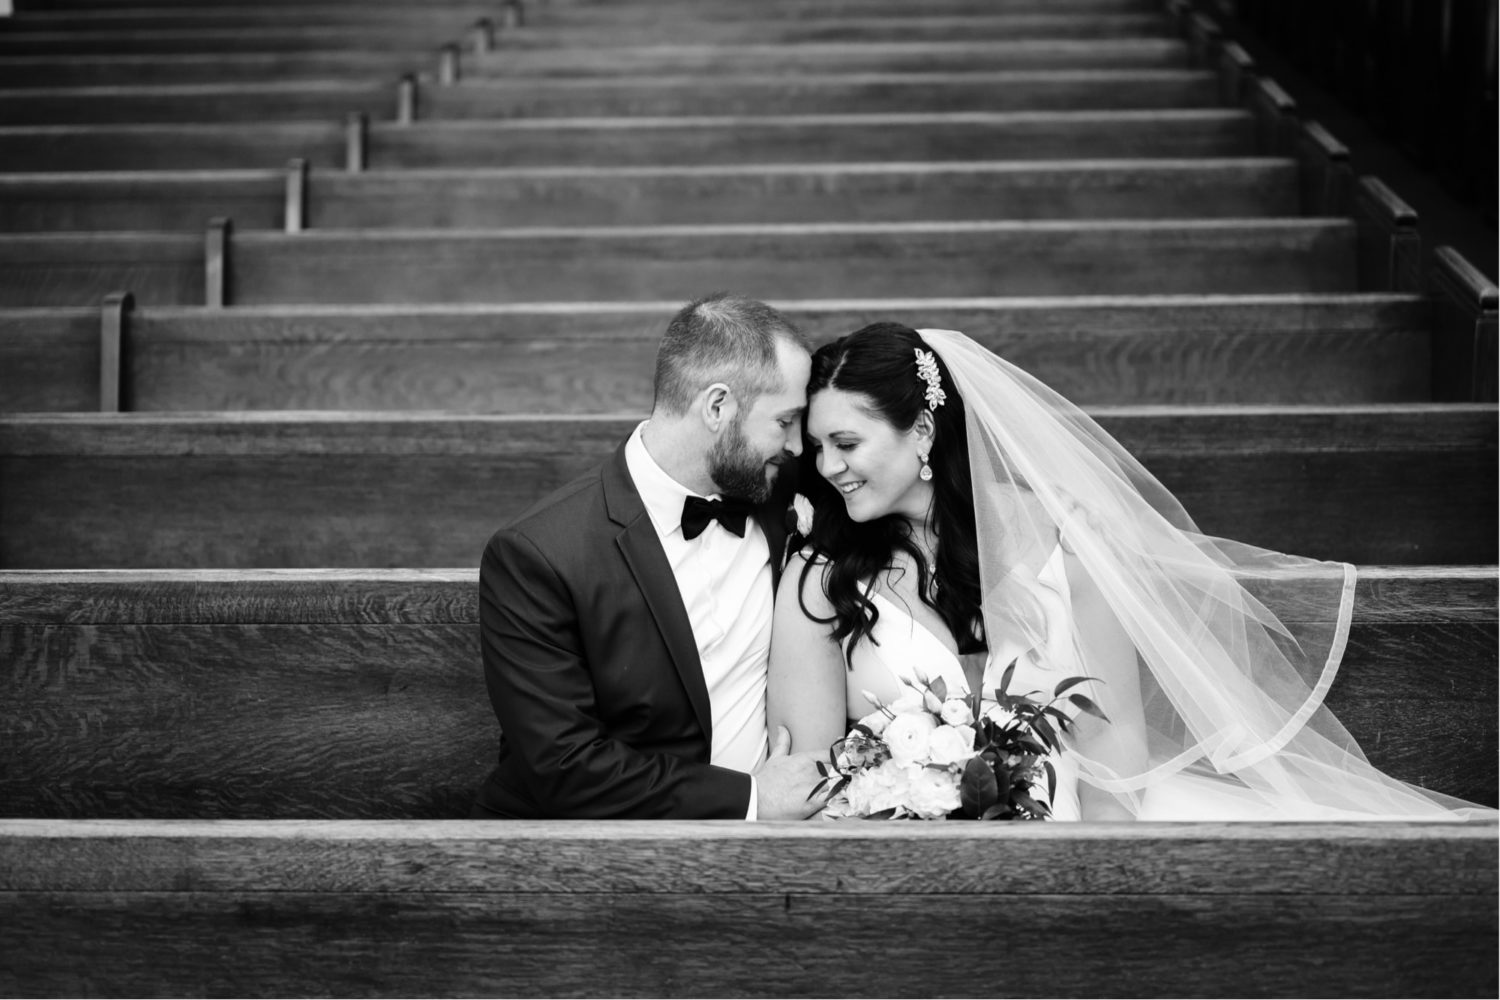 Bridal church portraits in black and white